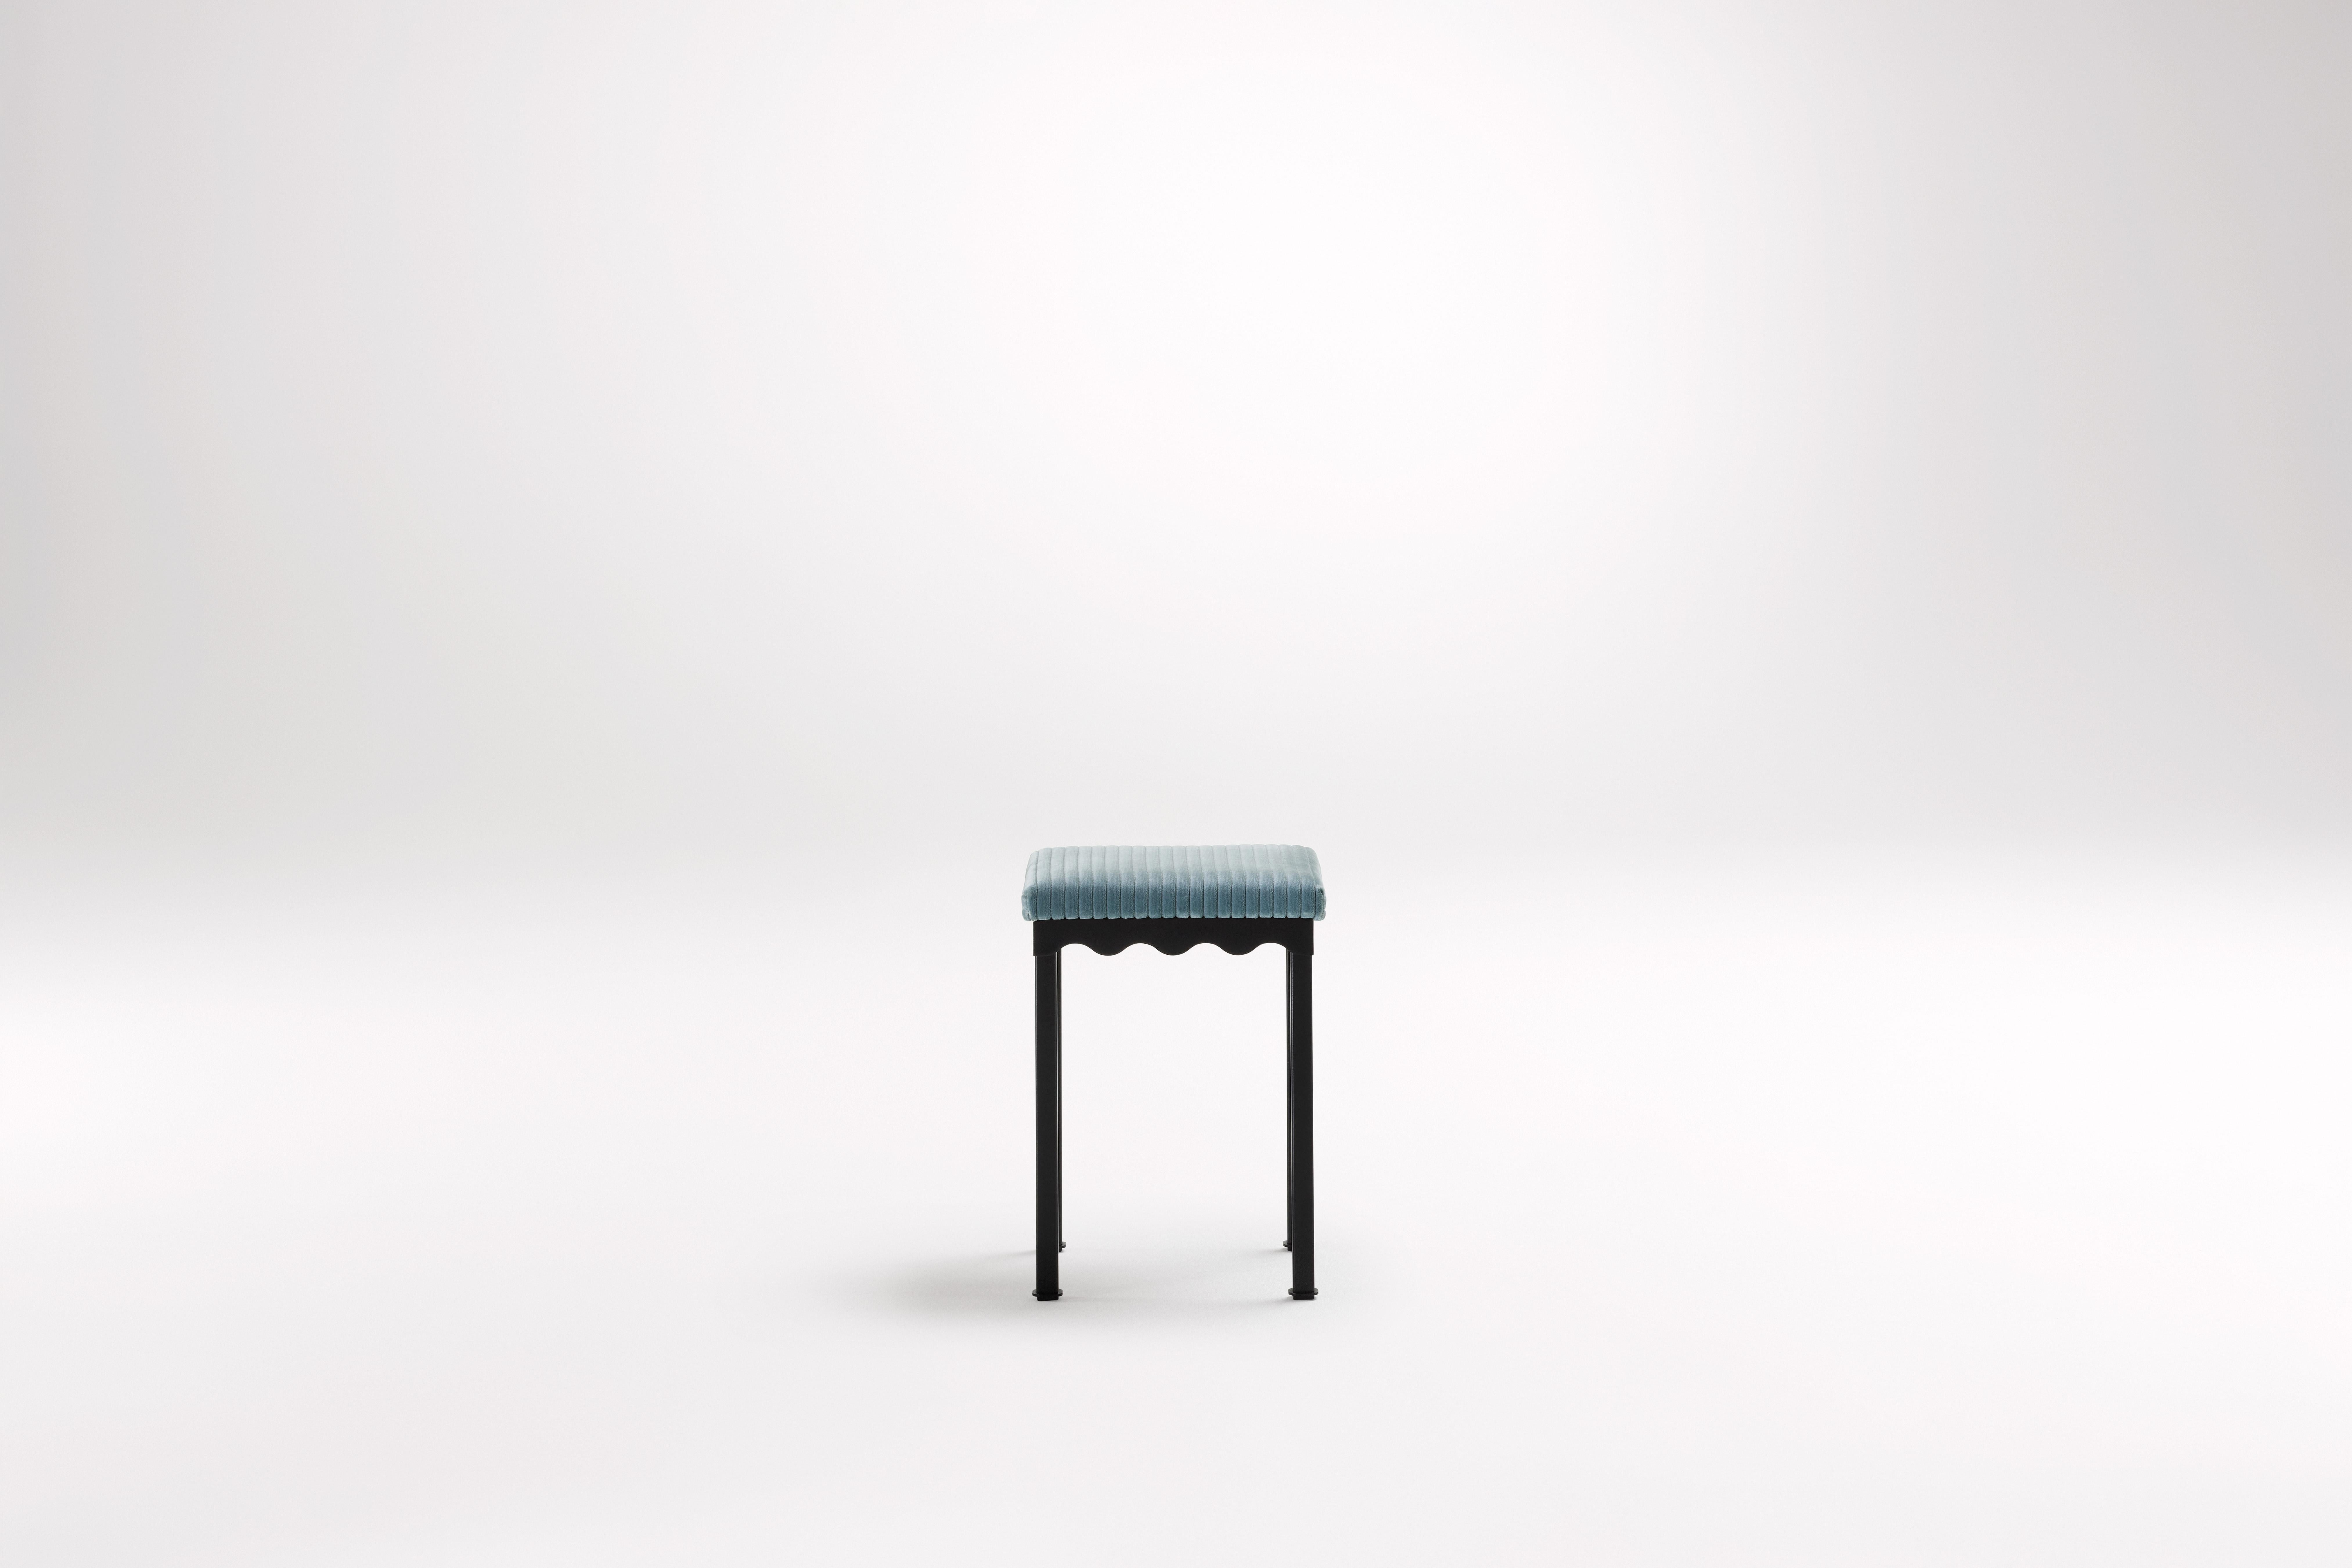 Oracle Bellini Low Stool by Coco Flip
Dimensions: D 34 x W 34 x H 45 cm
Materials: Timber / Stone tops, Powder-coated steel frame. 
Weight: 5 kg
Frame Finishes: Textura Black.

Coco Flip is a Melbourne based furniture and lighting design studio, run